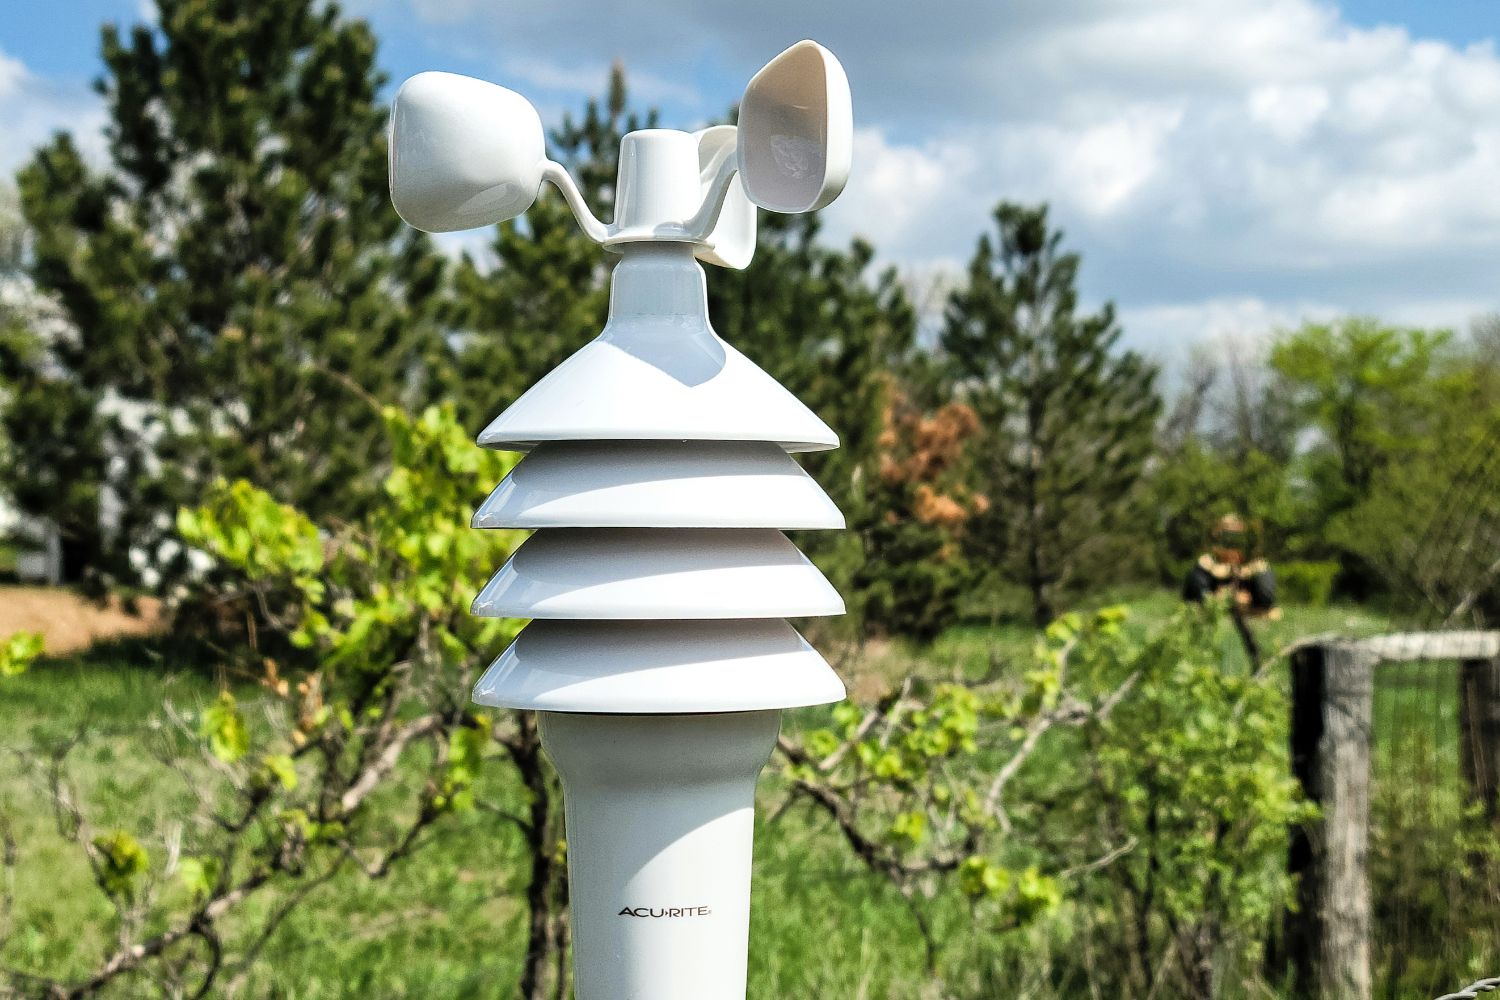 The AcuRite Notos 3-in-1 Home Weather Station and a phone showing the AcuRite installed in a lush outdoor area.